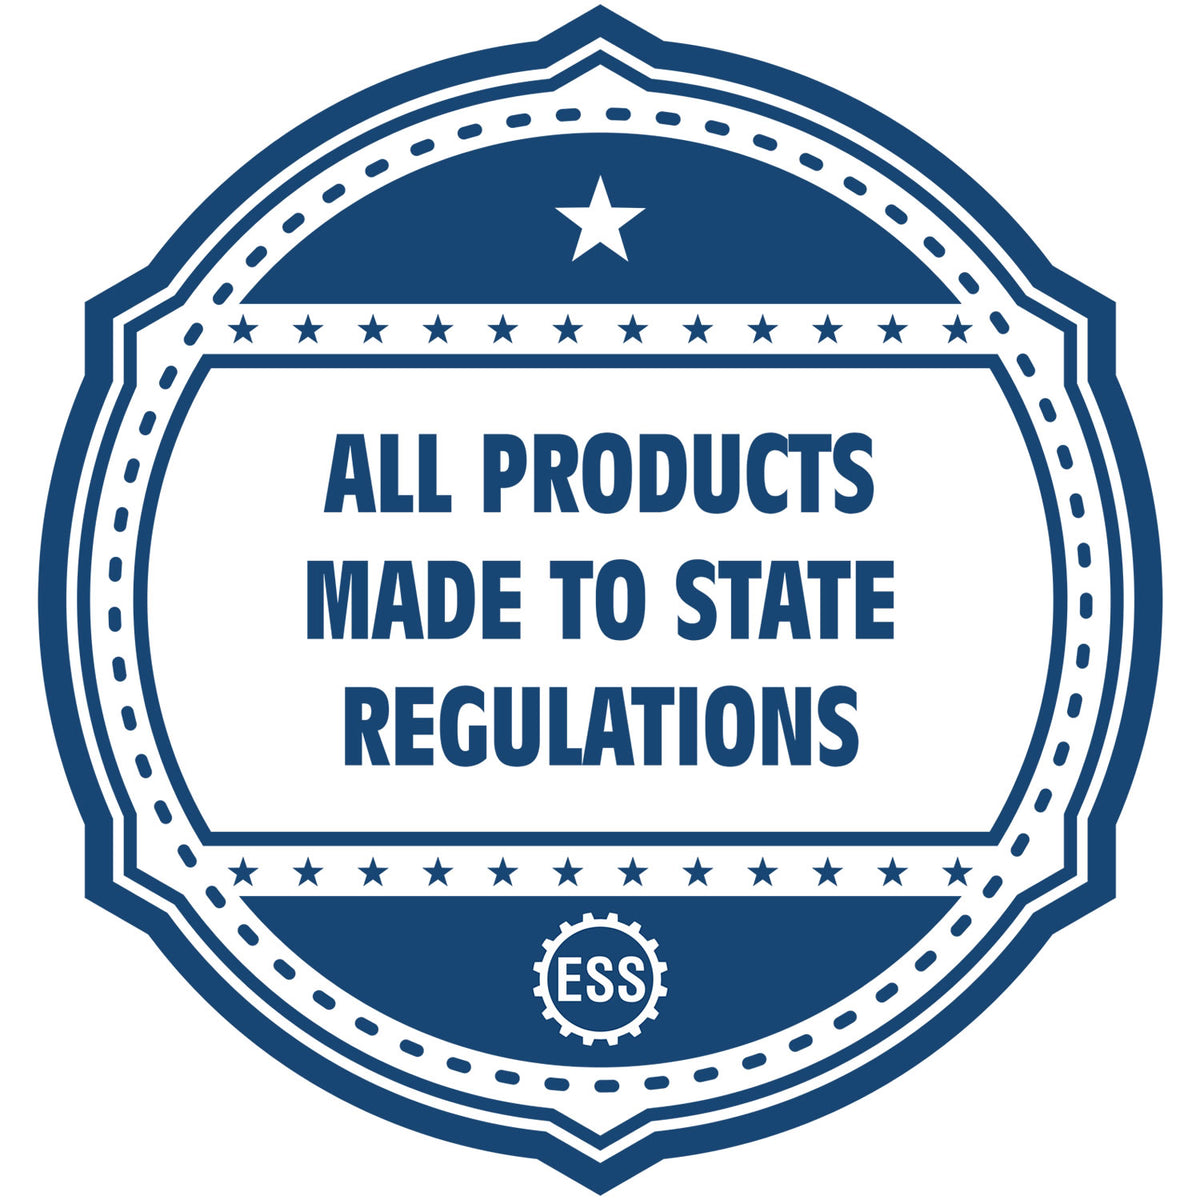 An icon or badge element for the State of Pennsylvania Architectural Seal Embosser showing that this product is made in compliance with state regulations.